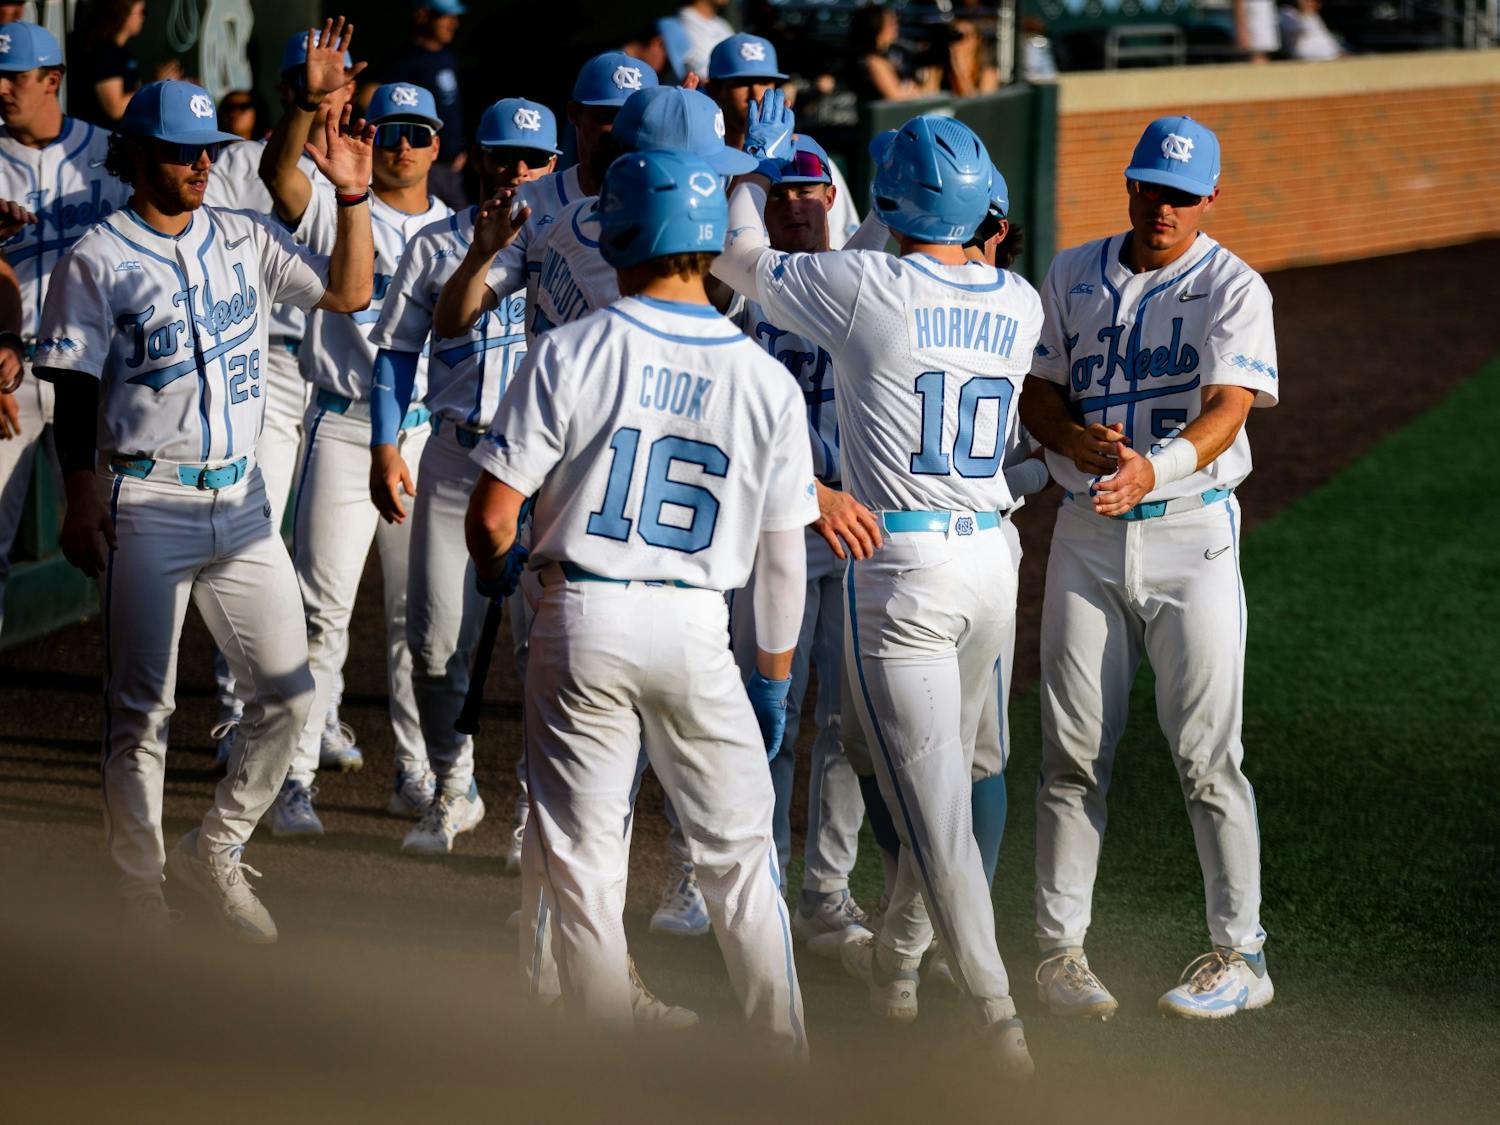 UNC junior infielder Mac Horvath (10) scores off a single by UNC junior catcher Tomas Frick (52) in the first inning of the baseball game against Duke at Boshamer Stadium on Friday, March 24, 2023. UNC fell to Duke 8-5.